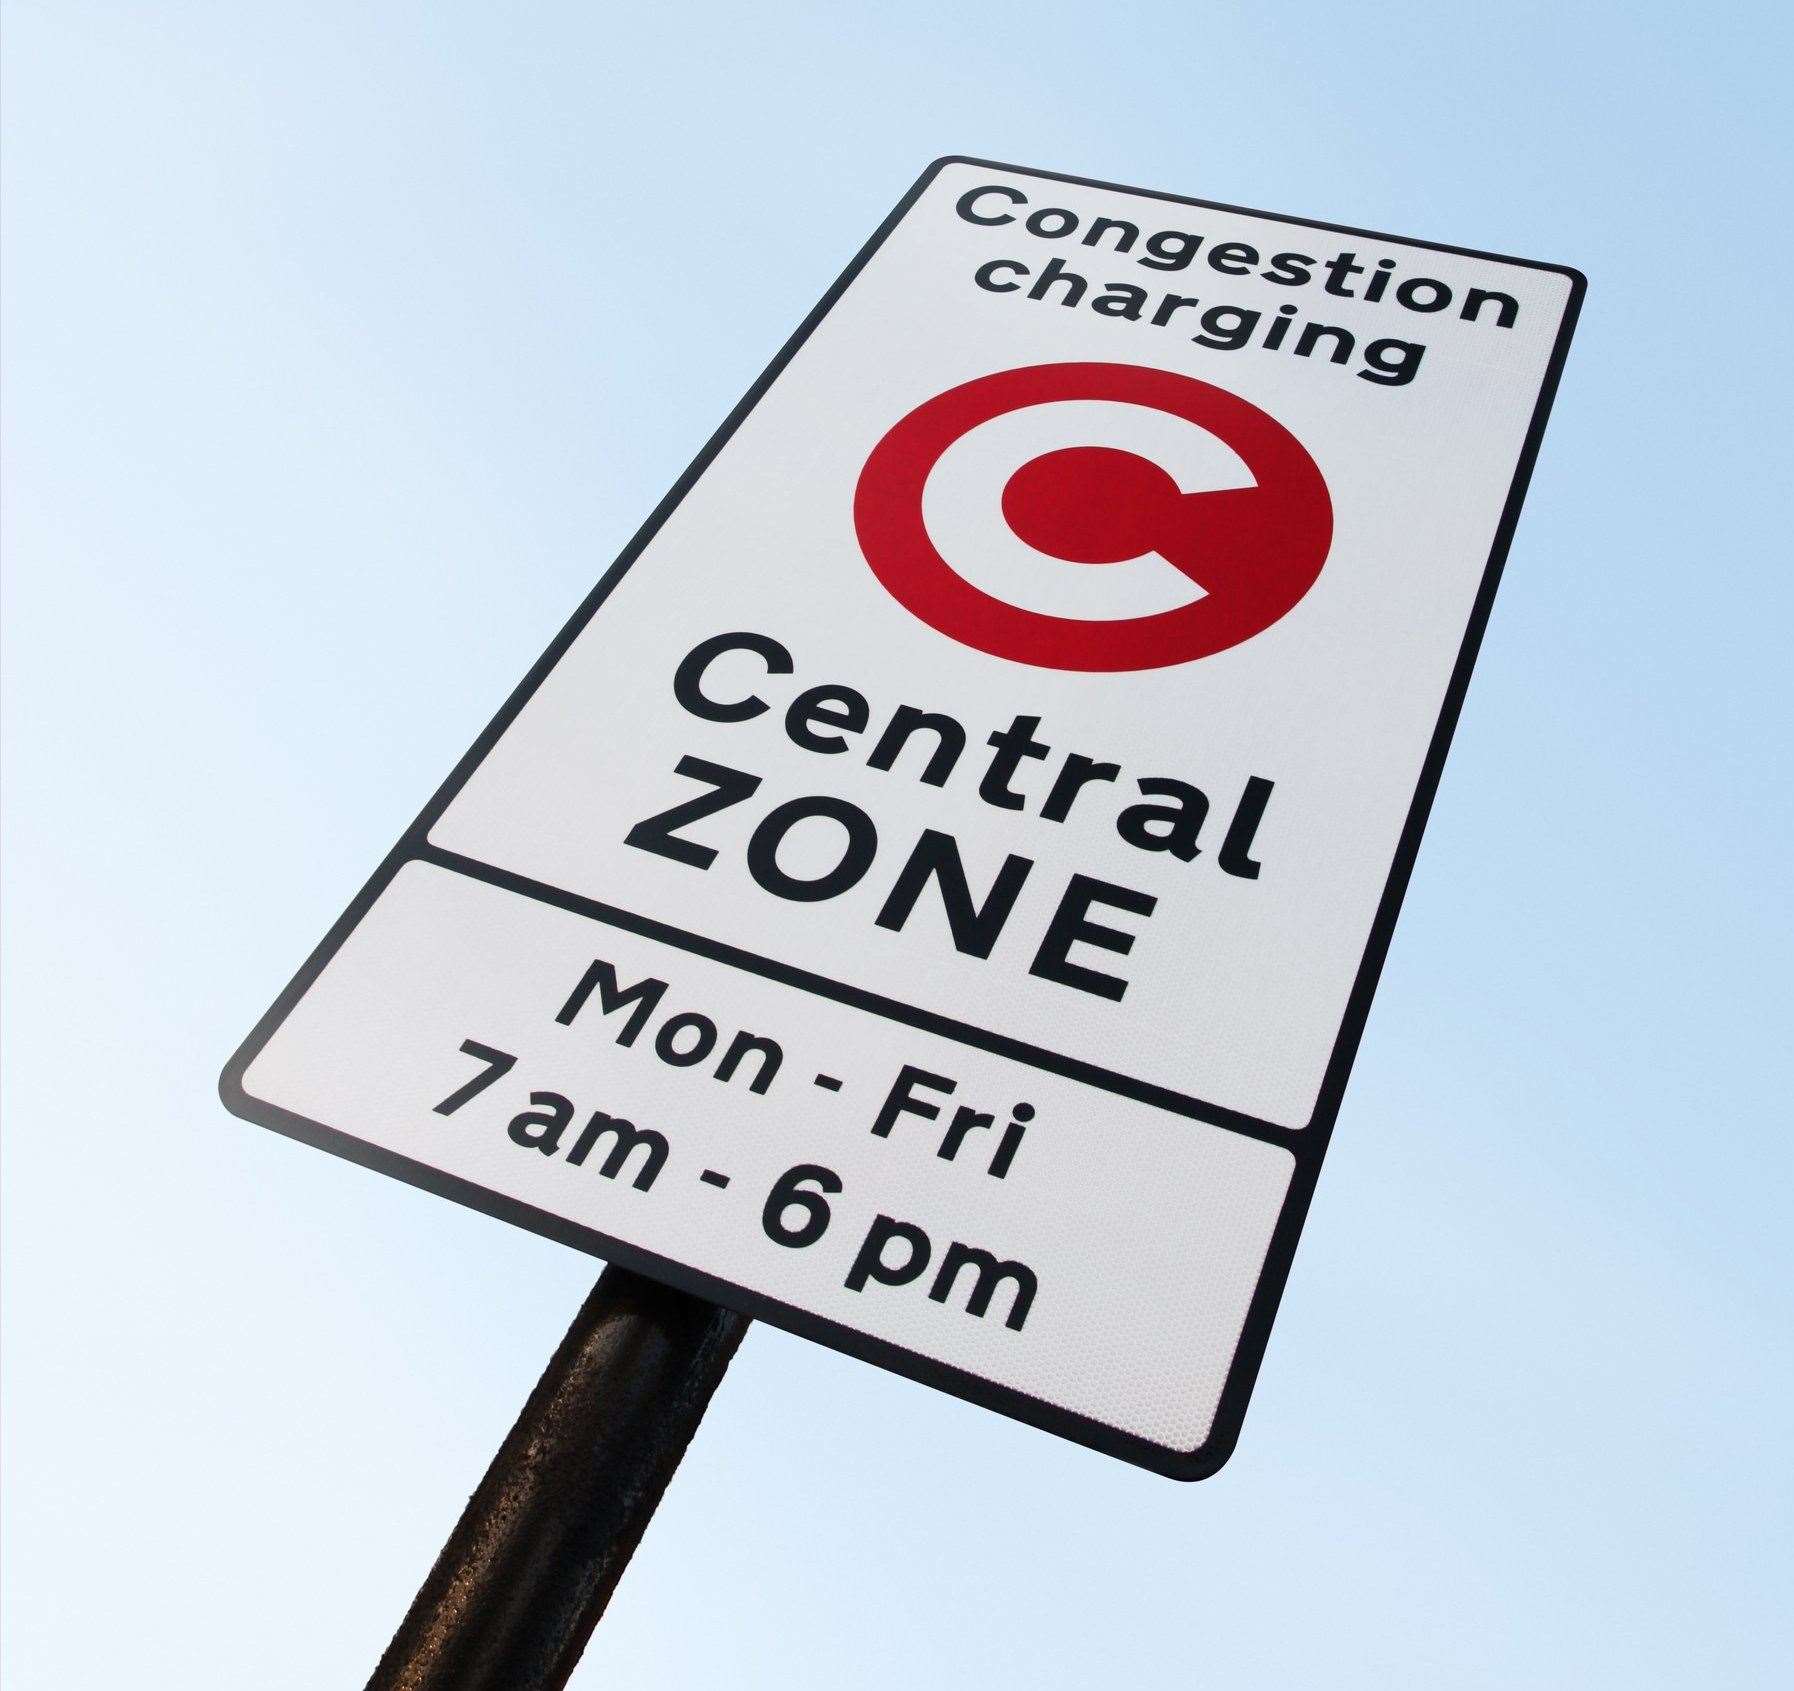 The Greater London Boundary Charge could see Dartford residents charged £3.50 to enter Greater London.